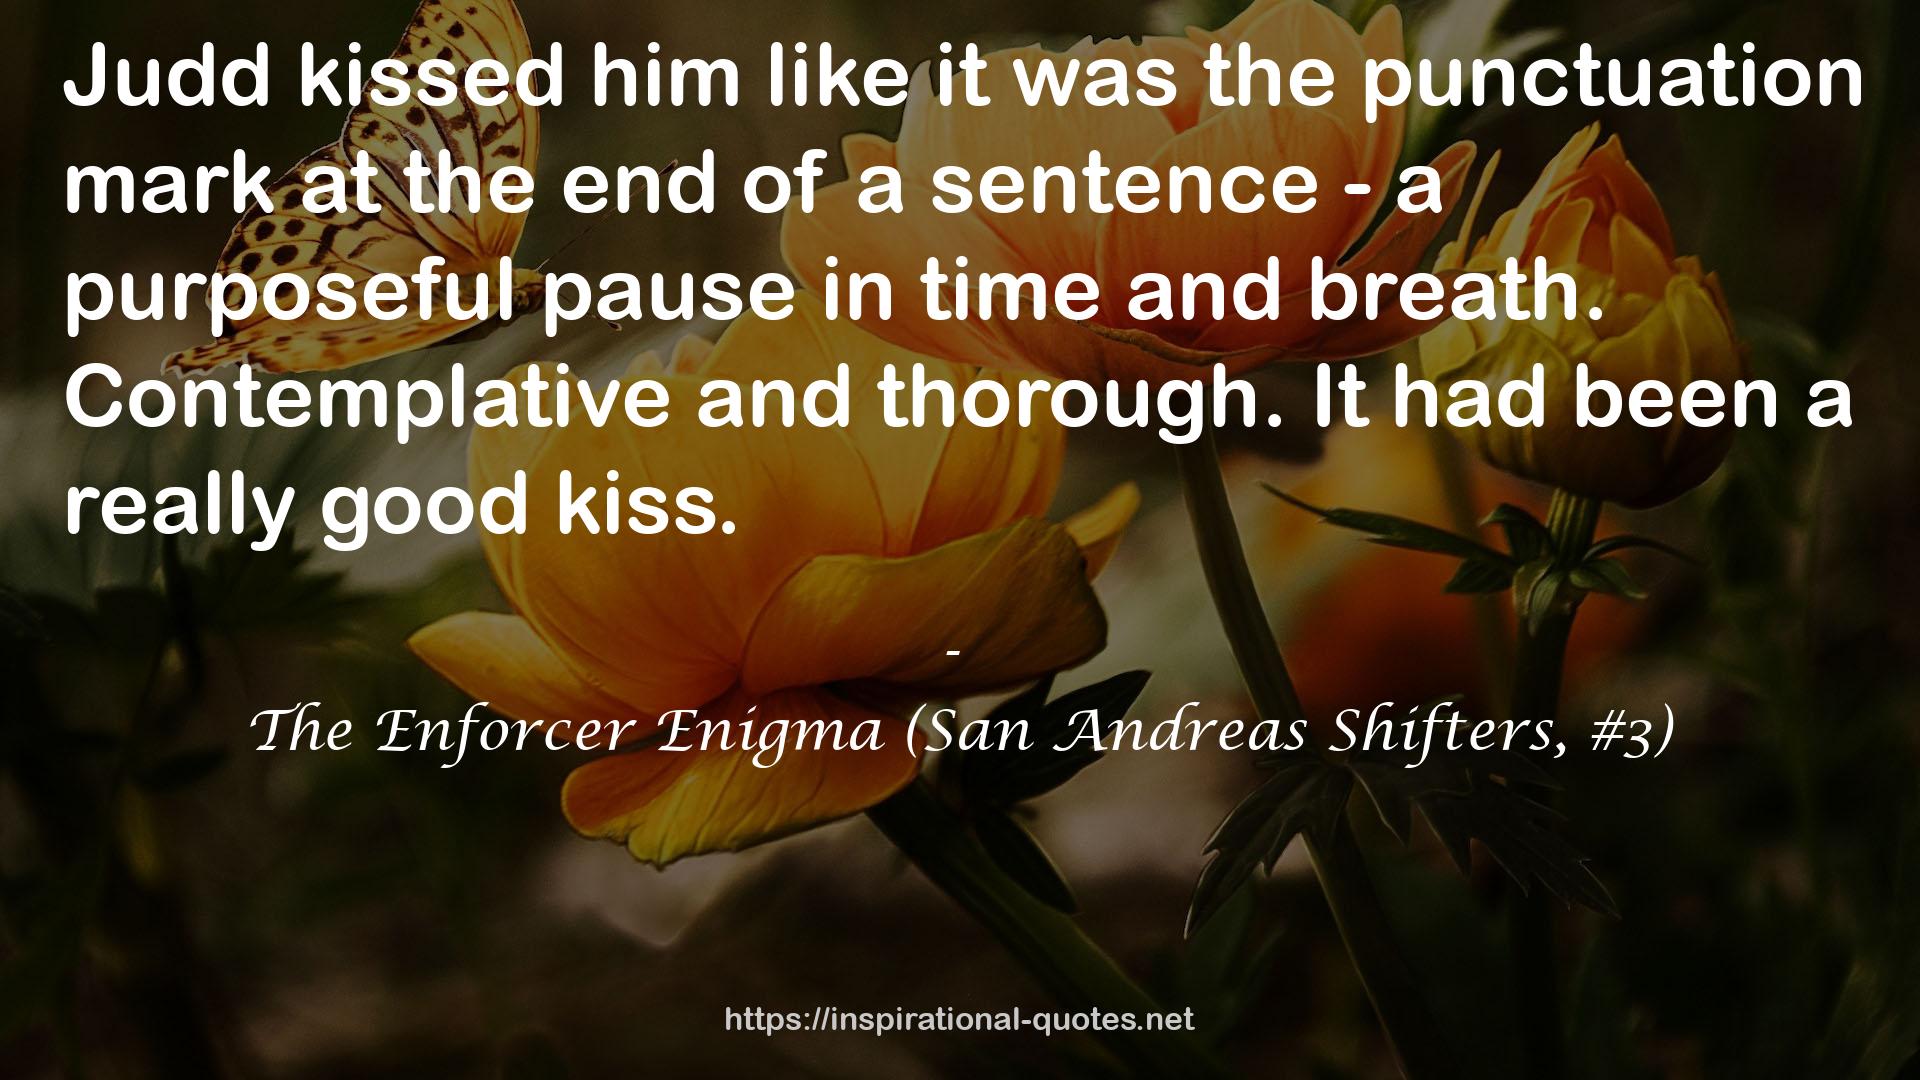 The Enforcer Enigma (San Andreas Shifters, #3) QUOTES